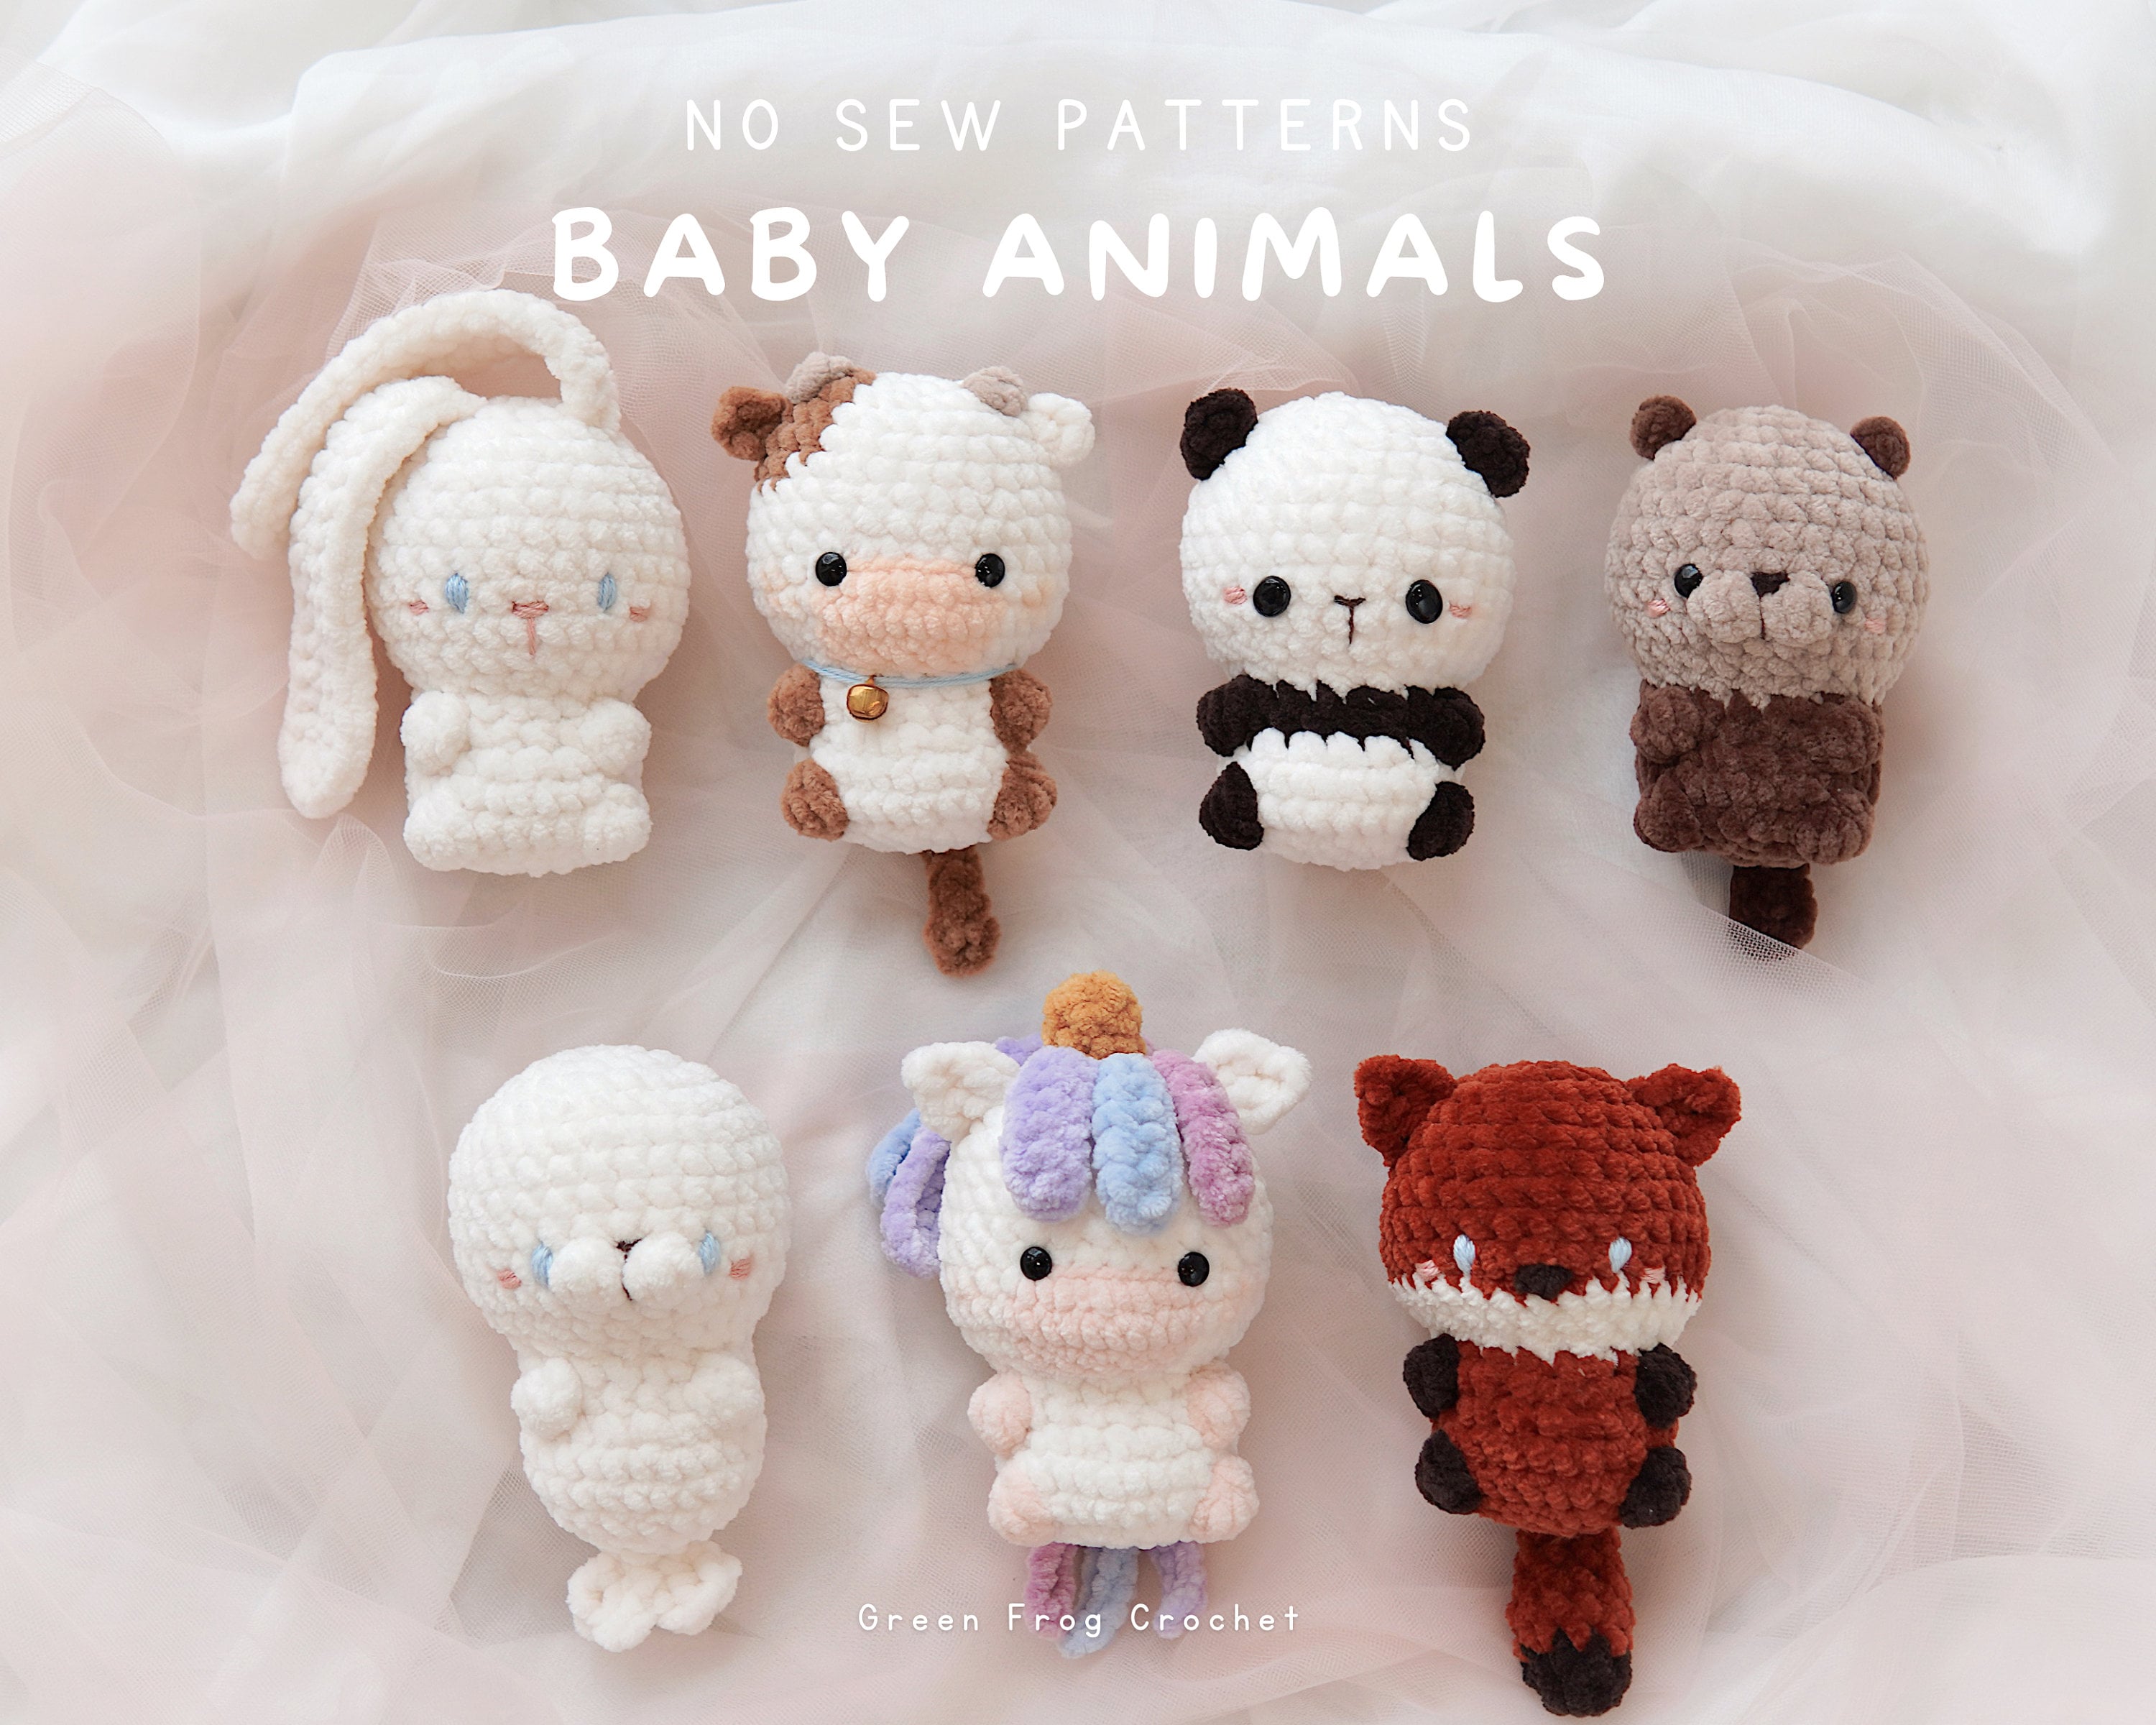 Improve Your Amigurumi Crochet Projects With This One Small Thing